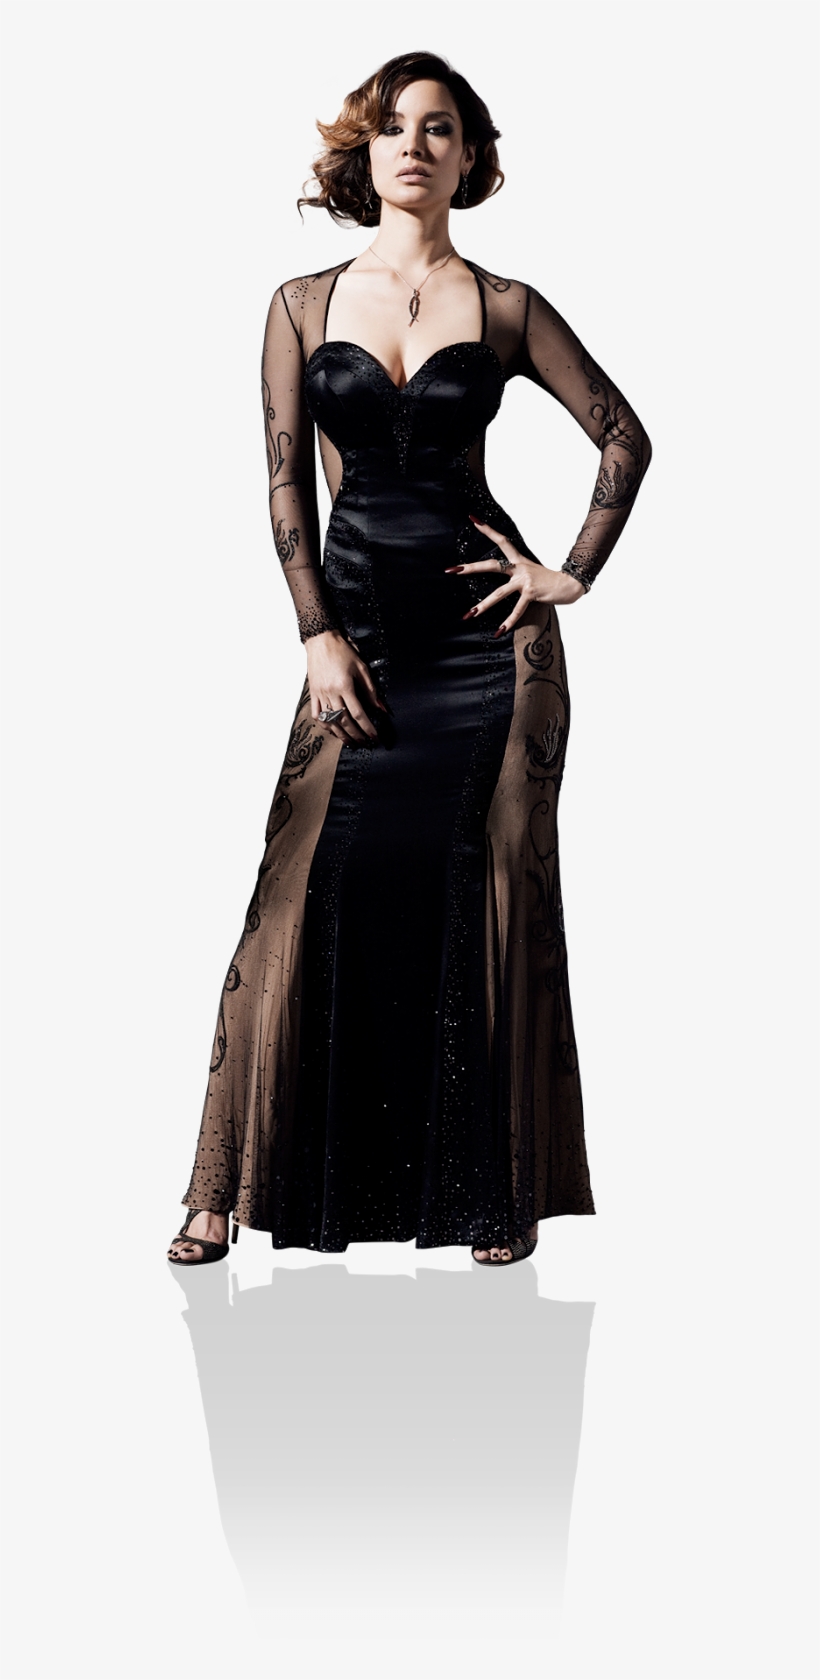 I Finish My Highlights Report With This Breathtaking - James Bond Girl Black Dress, transparent png #3221664